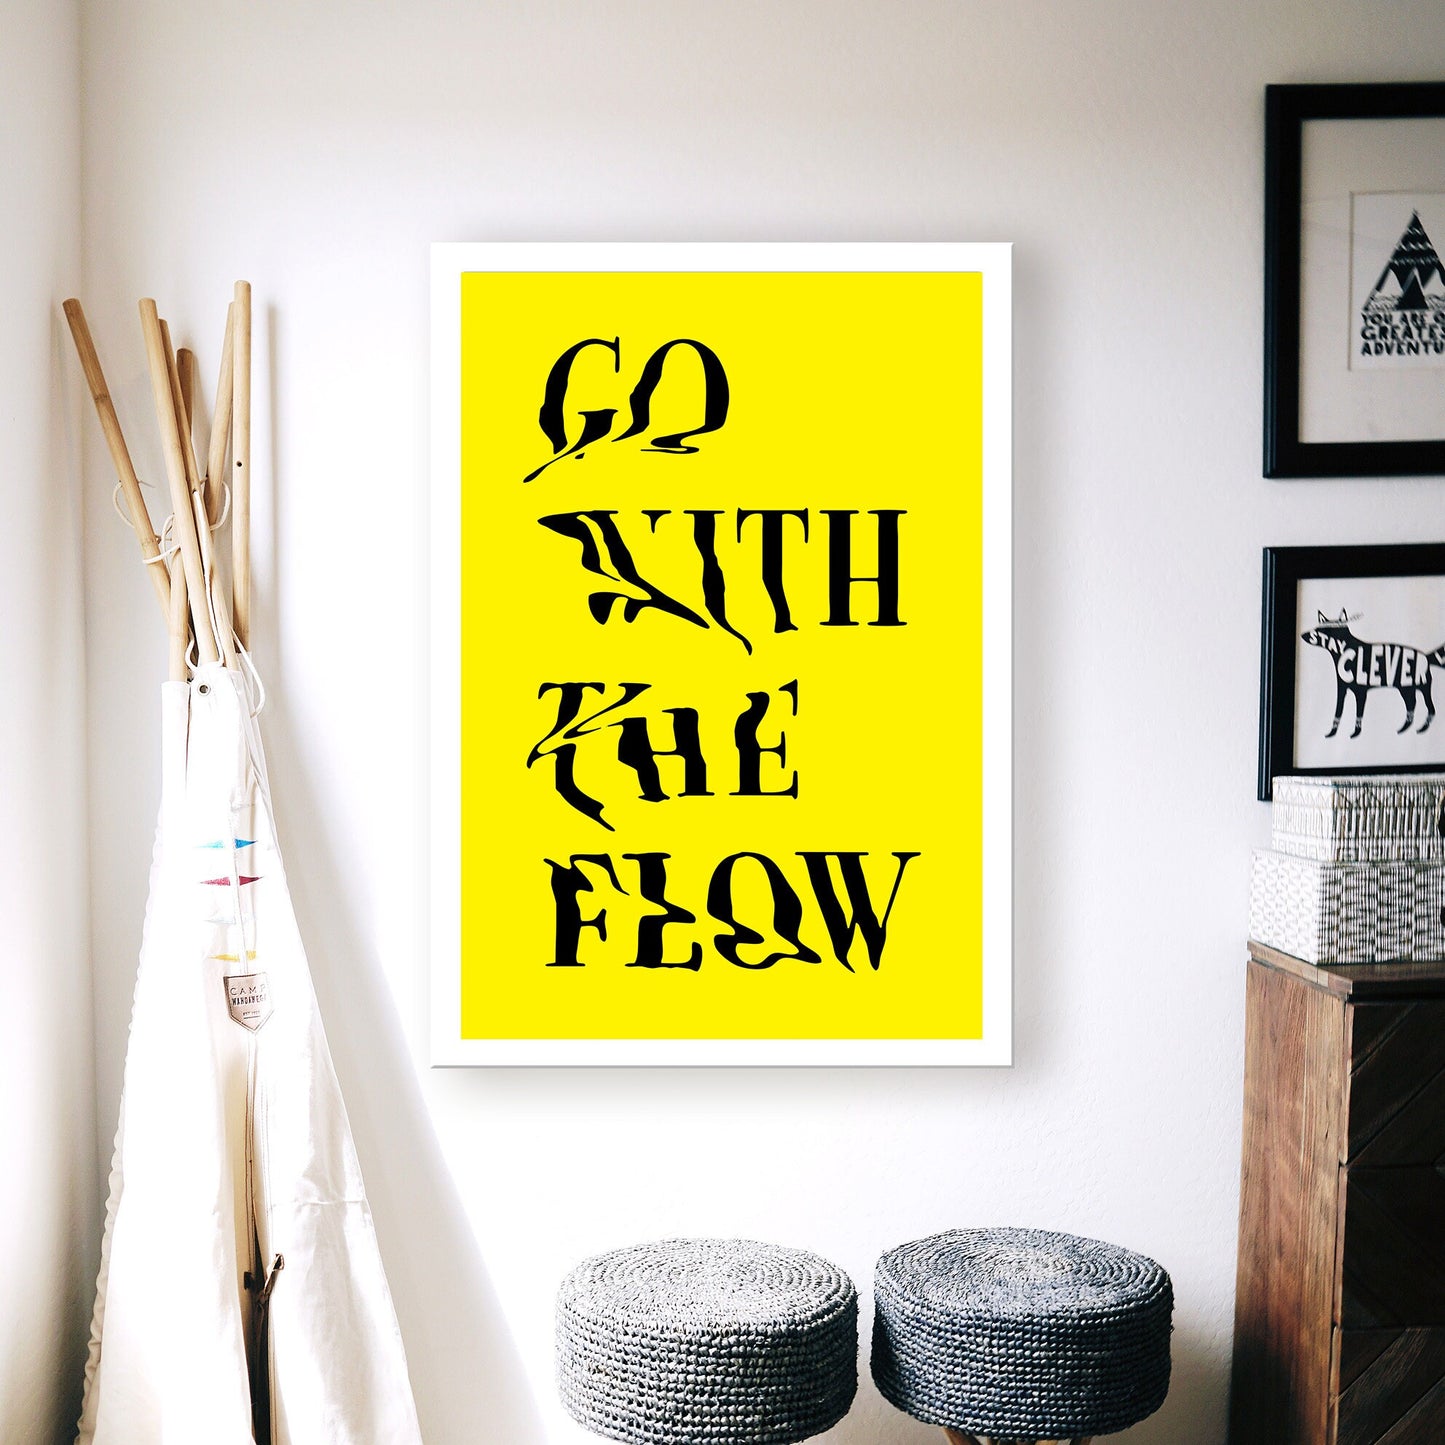 Go With The Flow Art Poster, Yellow Positive Motto Art Print, Minimalist Typography Motivational Slogan Home Decor Gift, Cool Quote Wall Art